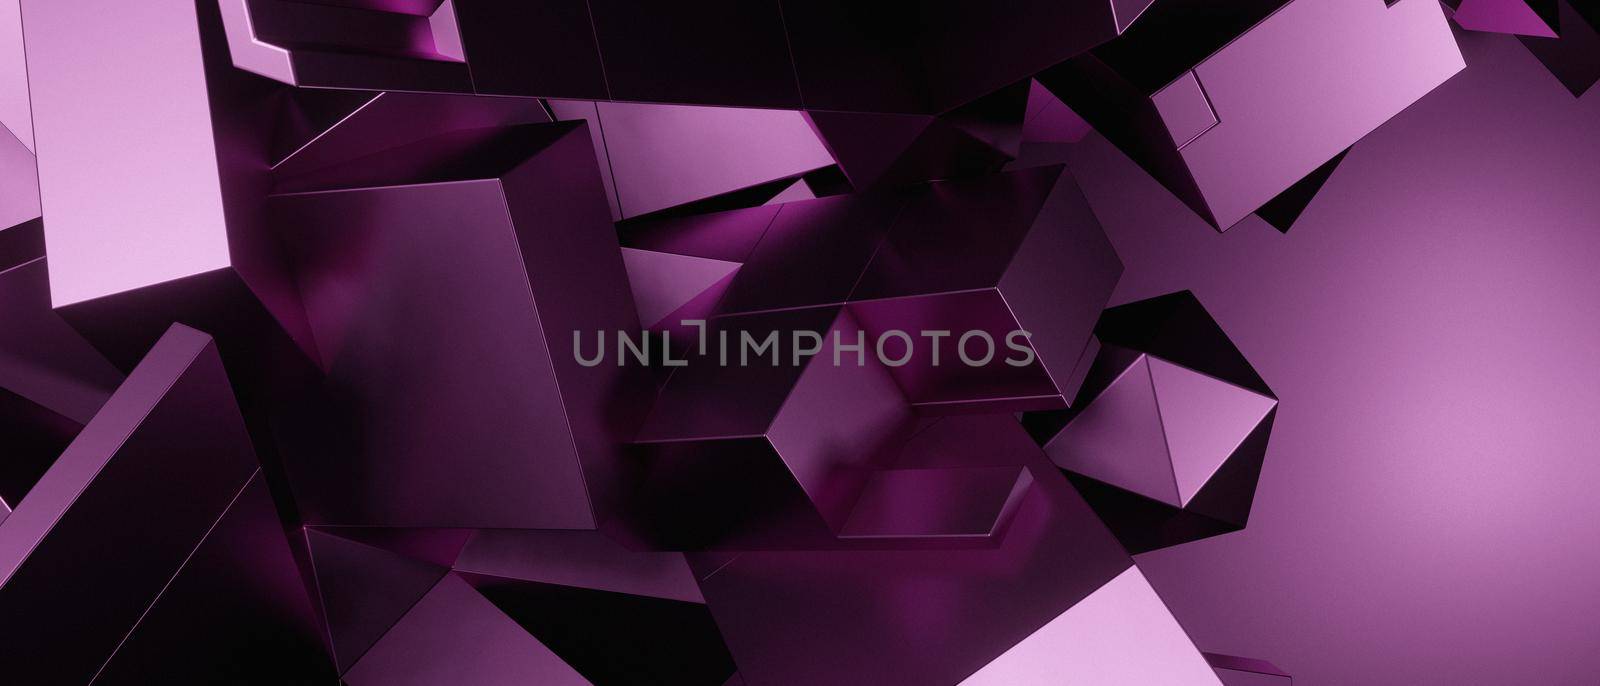 Abstract Shiny 3D SciFi Chaos Trendy Futuristic Purple Violet Iillustration Background Wallpaper 3D Render by yay_lmrb